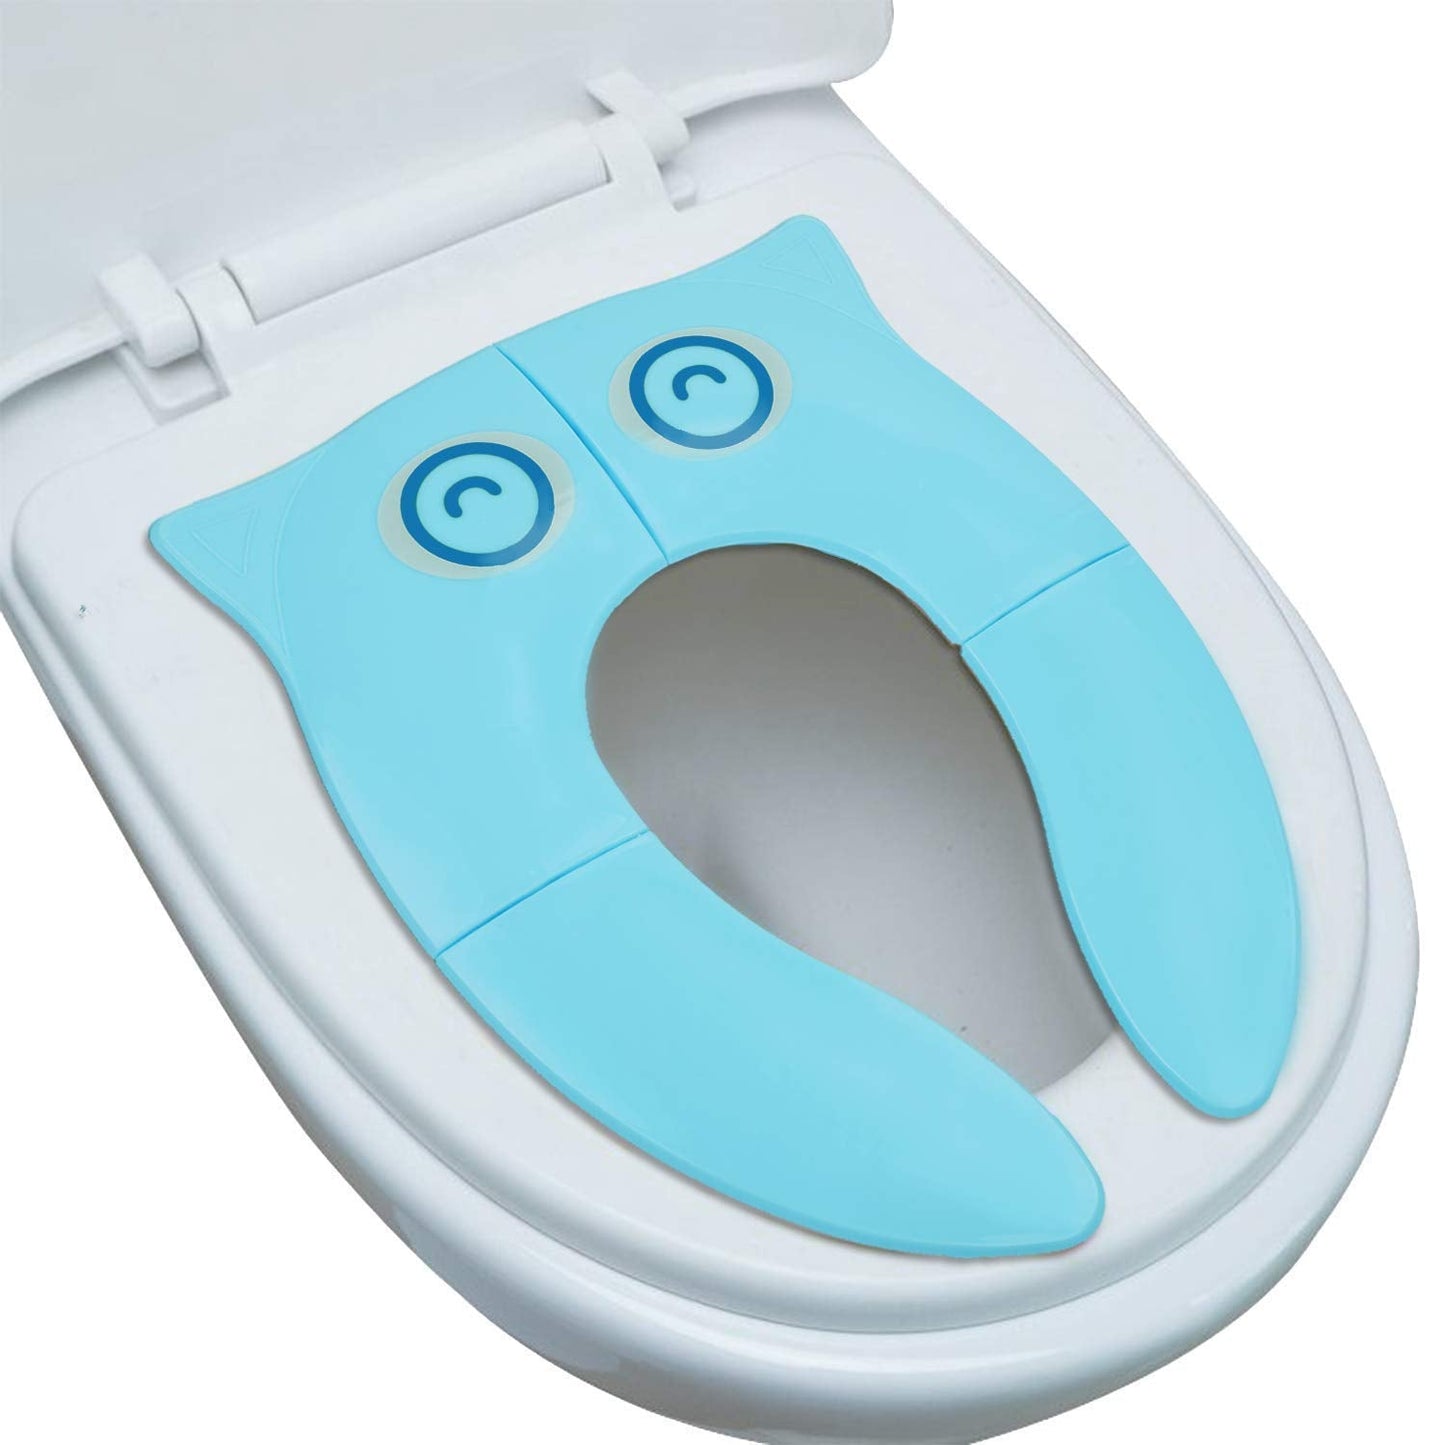 Plastic Inovera Portable Baby Toilet Seat Foldable Western Kids Potty Trainer Cover For Toddler Boys Girls Travel, Blue